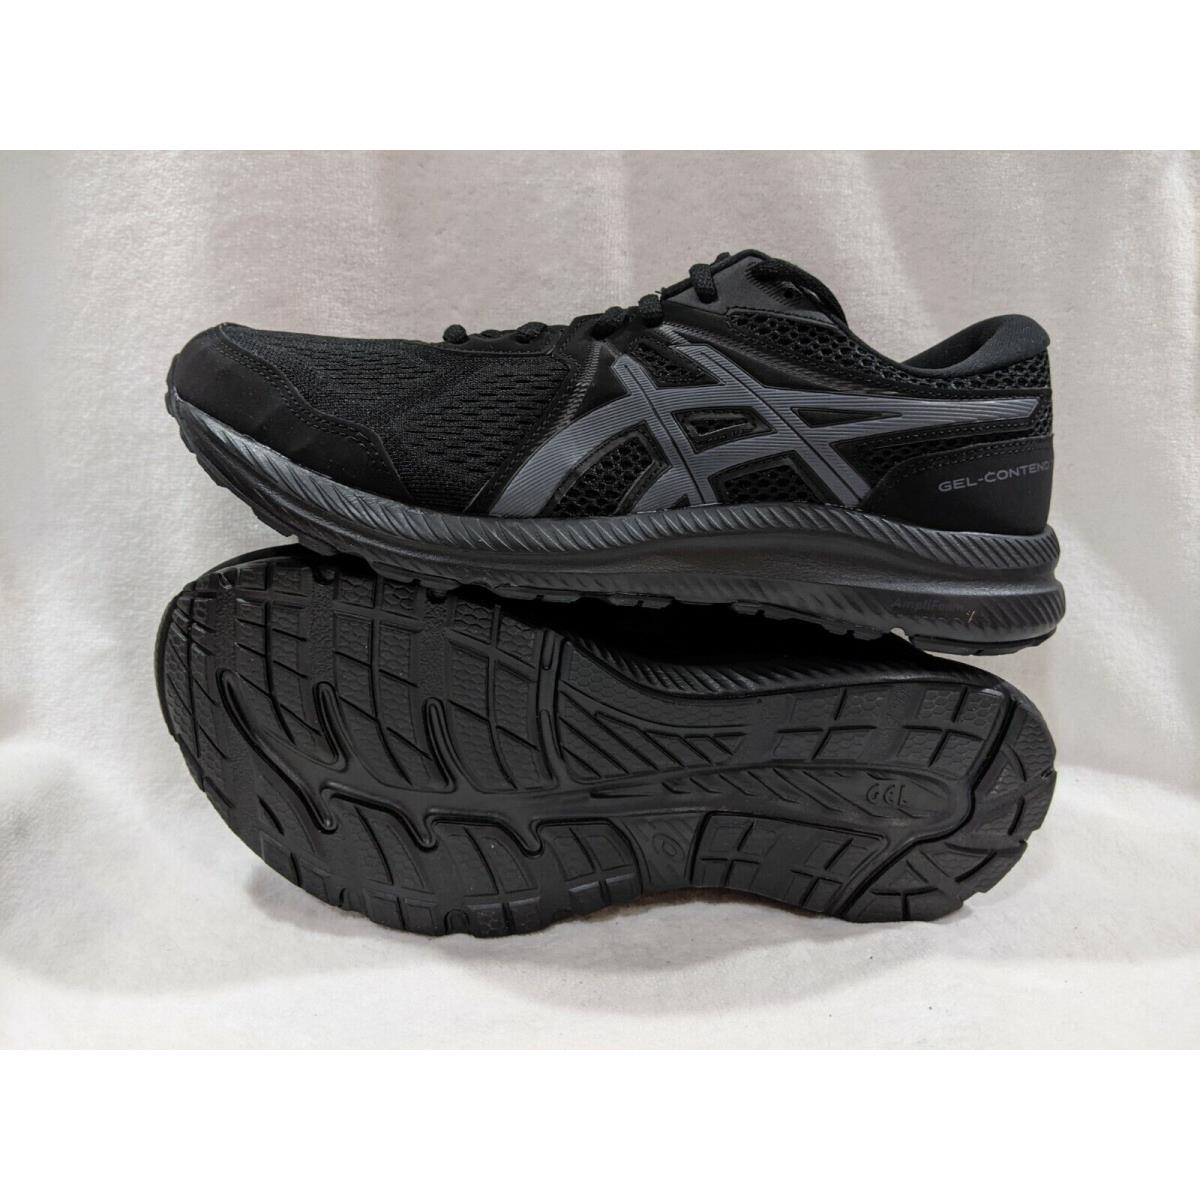 cigarrillo Madison Claire Asics Men`s Gel-contend 7 Black/grey Running Shoes-sz 9/9.5/10/11 X-wide 4E  | 016283763211 - ASICS shoes - Black/Grey | SporTipTop